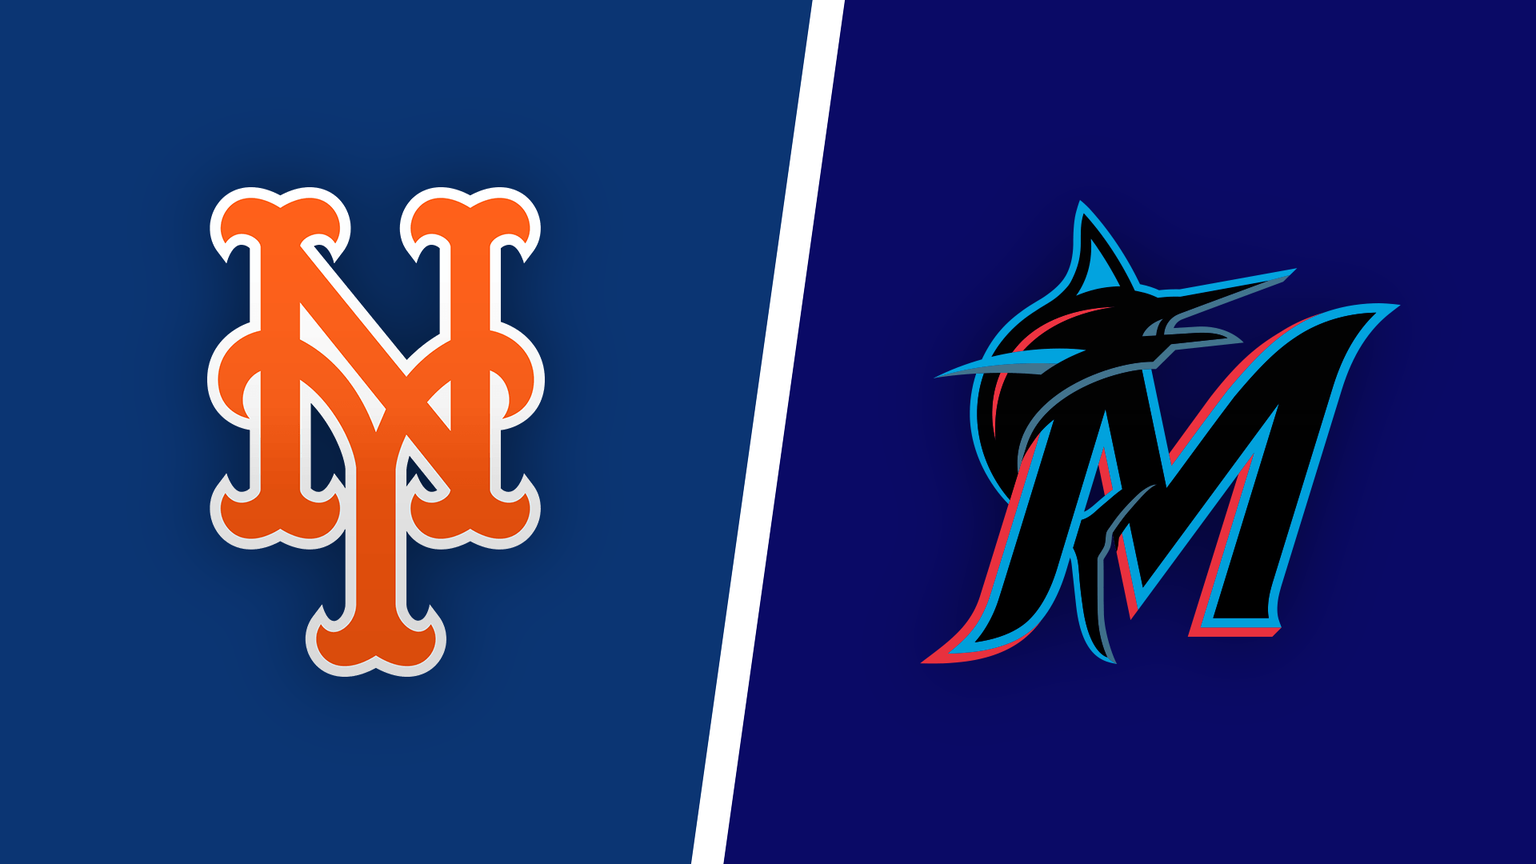 How to Watch Mets vs. Marlins on April 11, 2021 Live Online Streaming